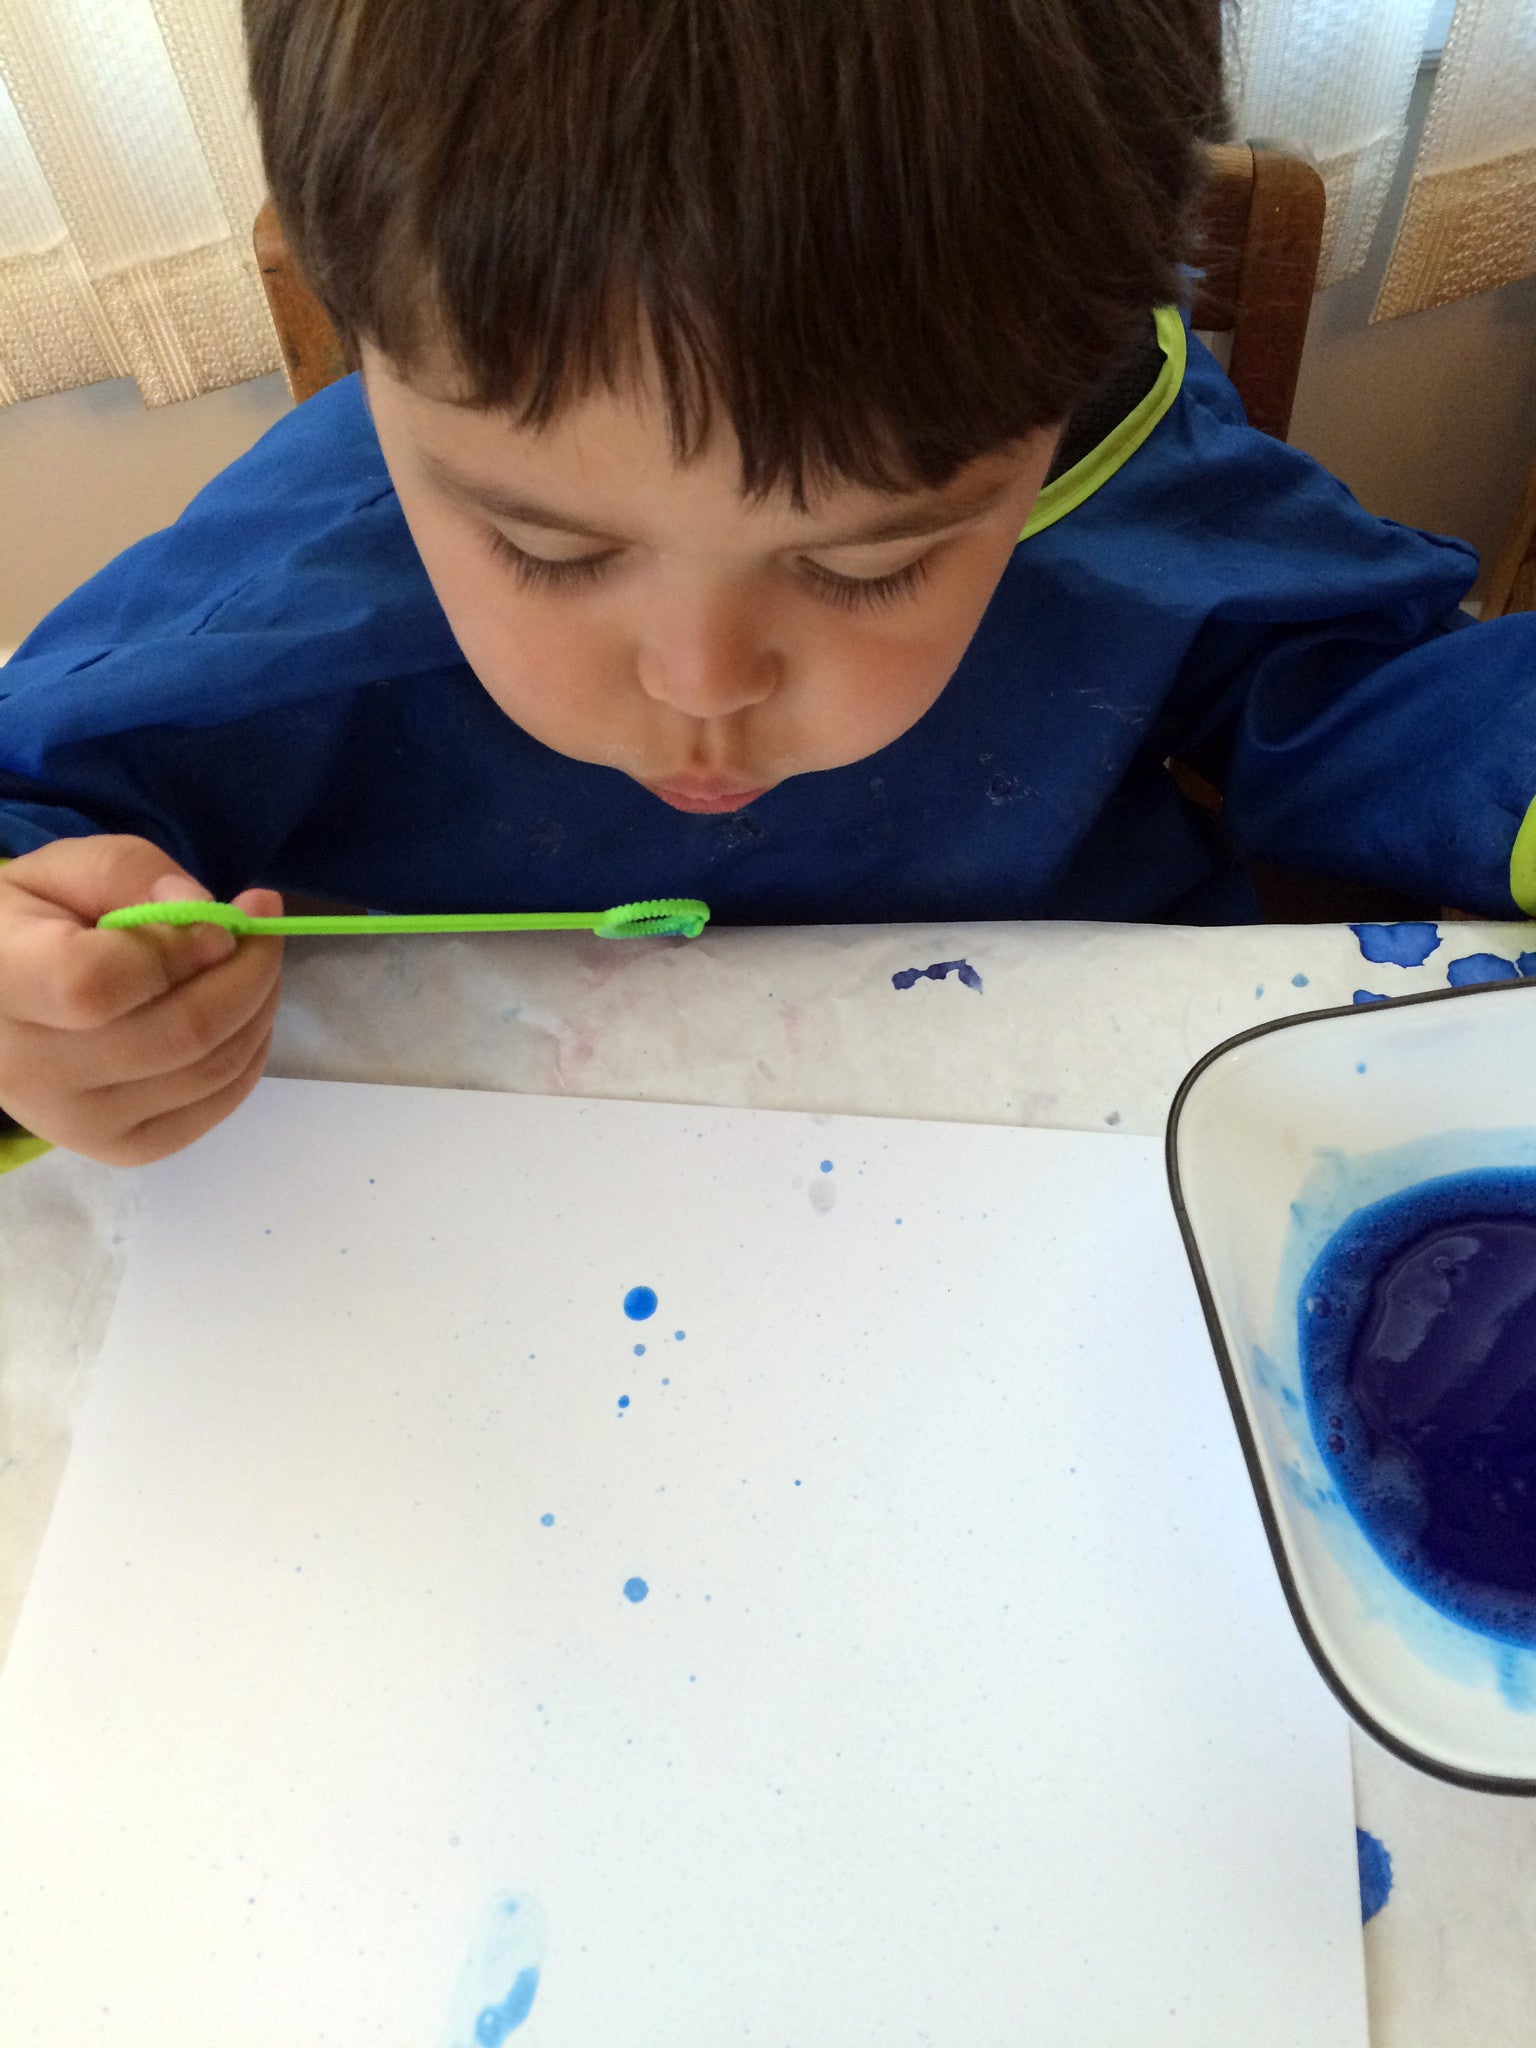 Bubble Painting, creative art activity using wind energy, to go along with May's Ivy Kids kit featuring the book The Wind Blew by Pat Hutchins. 